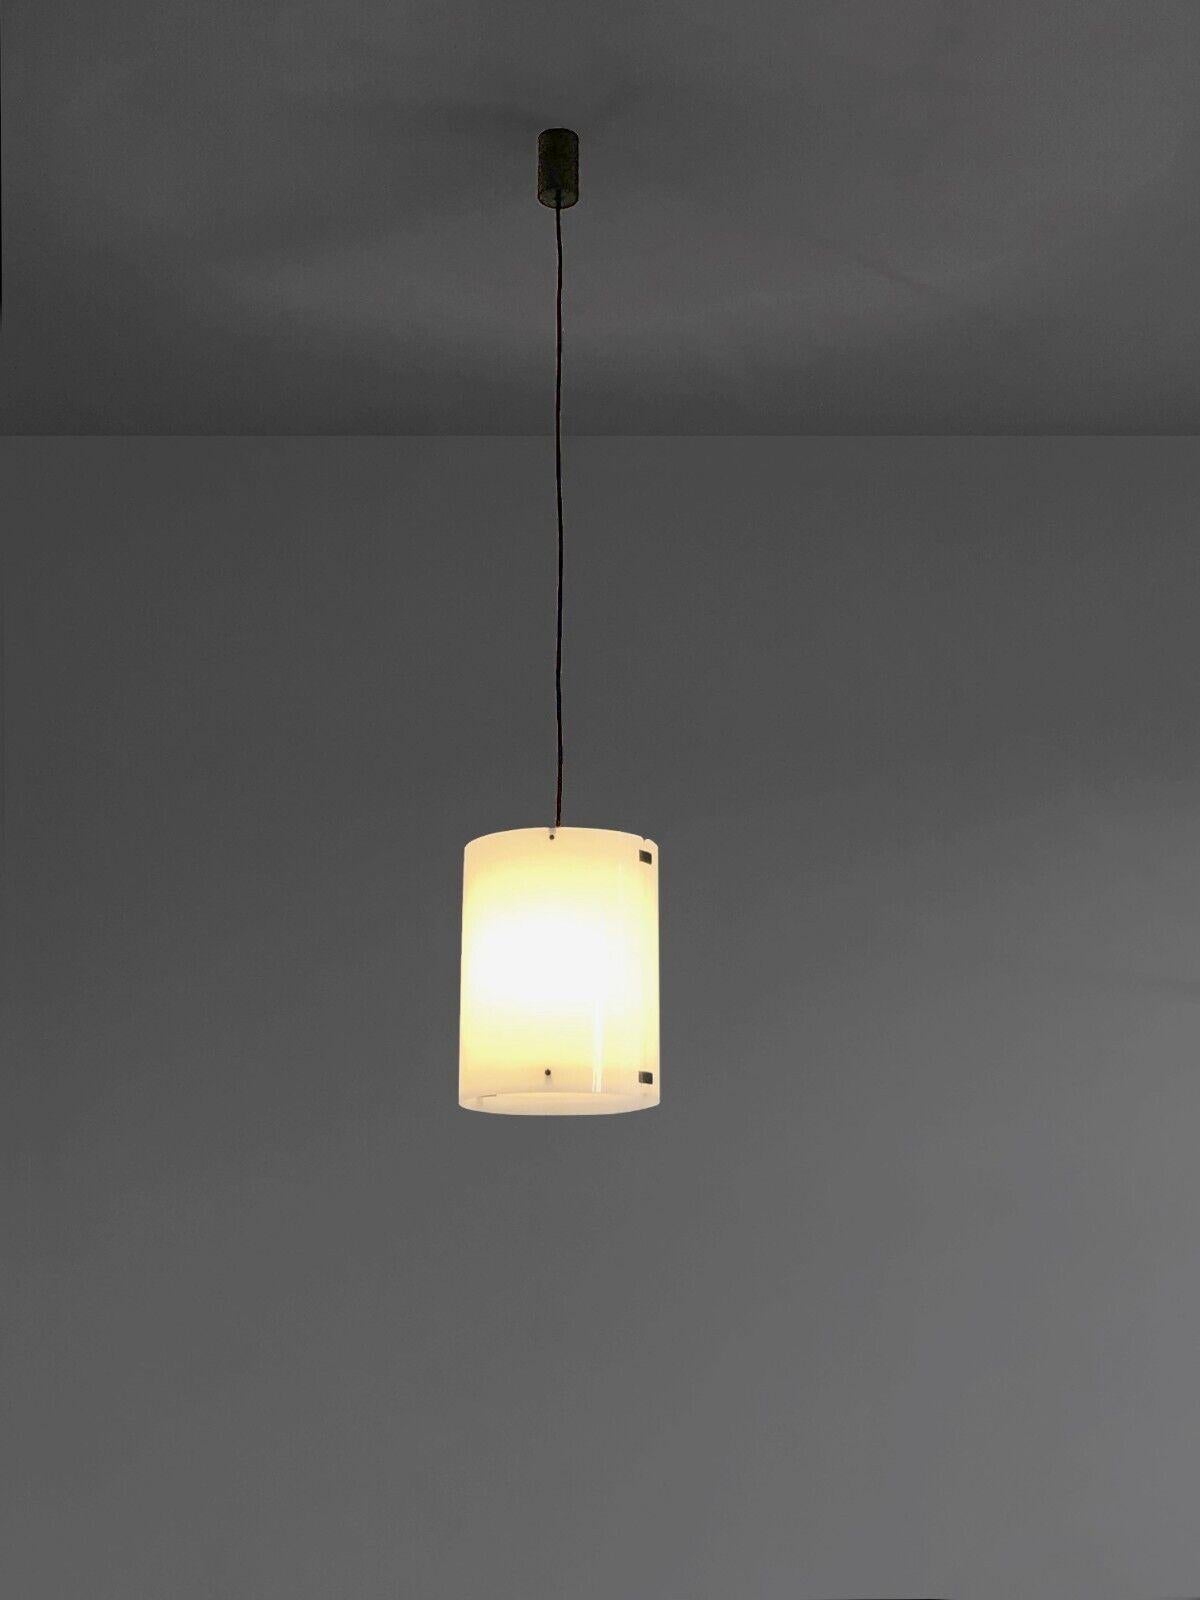 A MID-CENTURY-MODERN Ceiling Fixture LAMP by TITO AGNOLI & O-LUCE, Italy 1950 For Sale 5